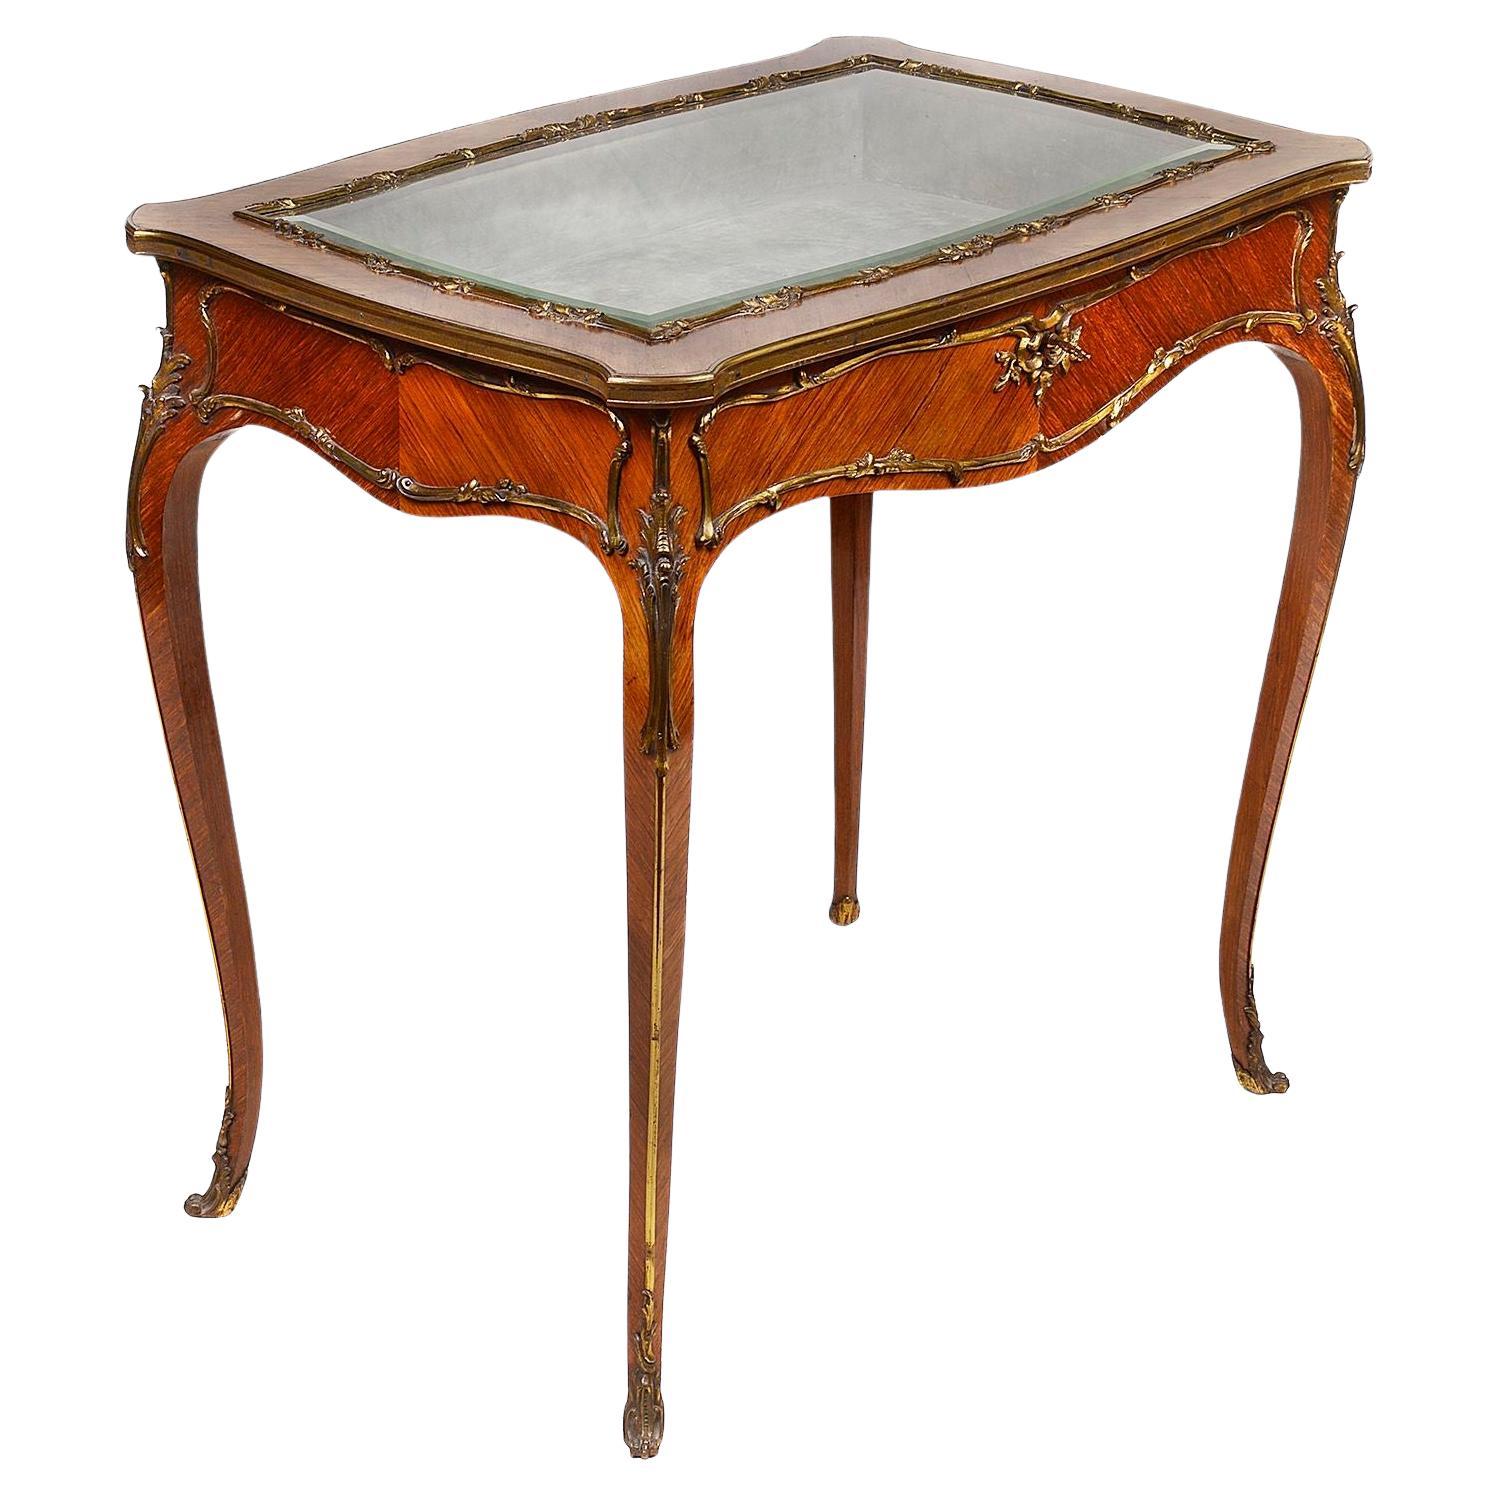 French Kingwood Bijouterie Table, 19th Century